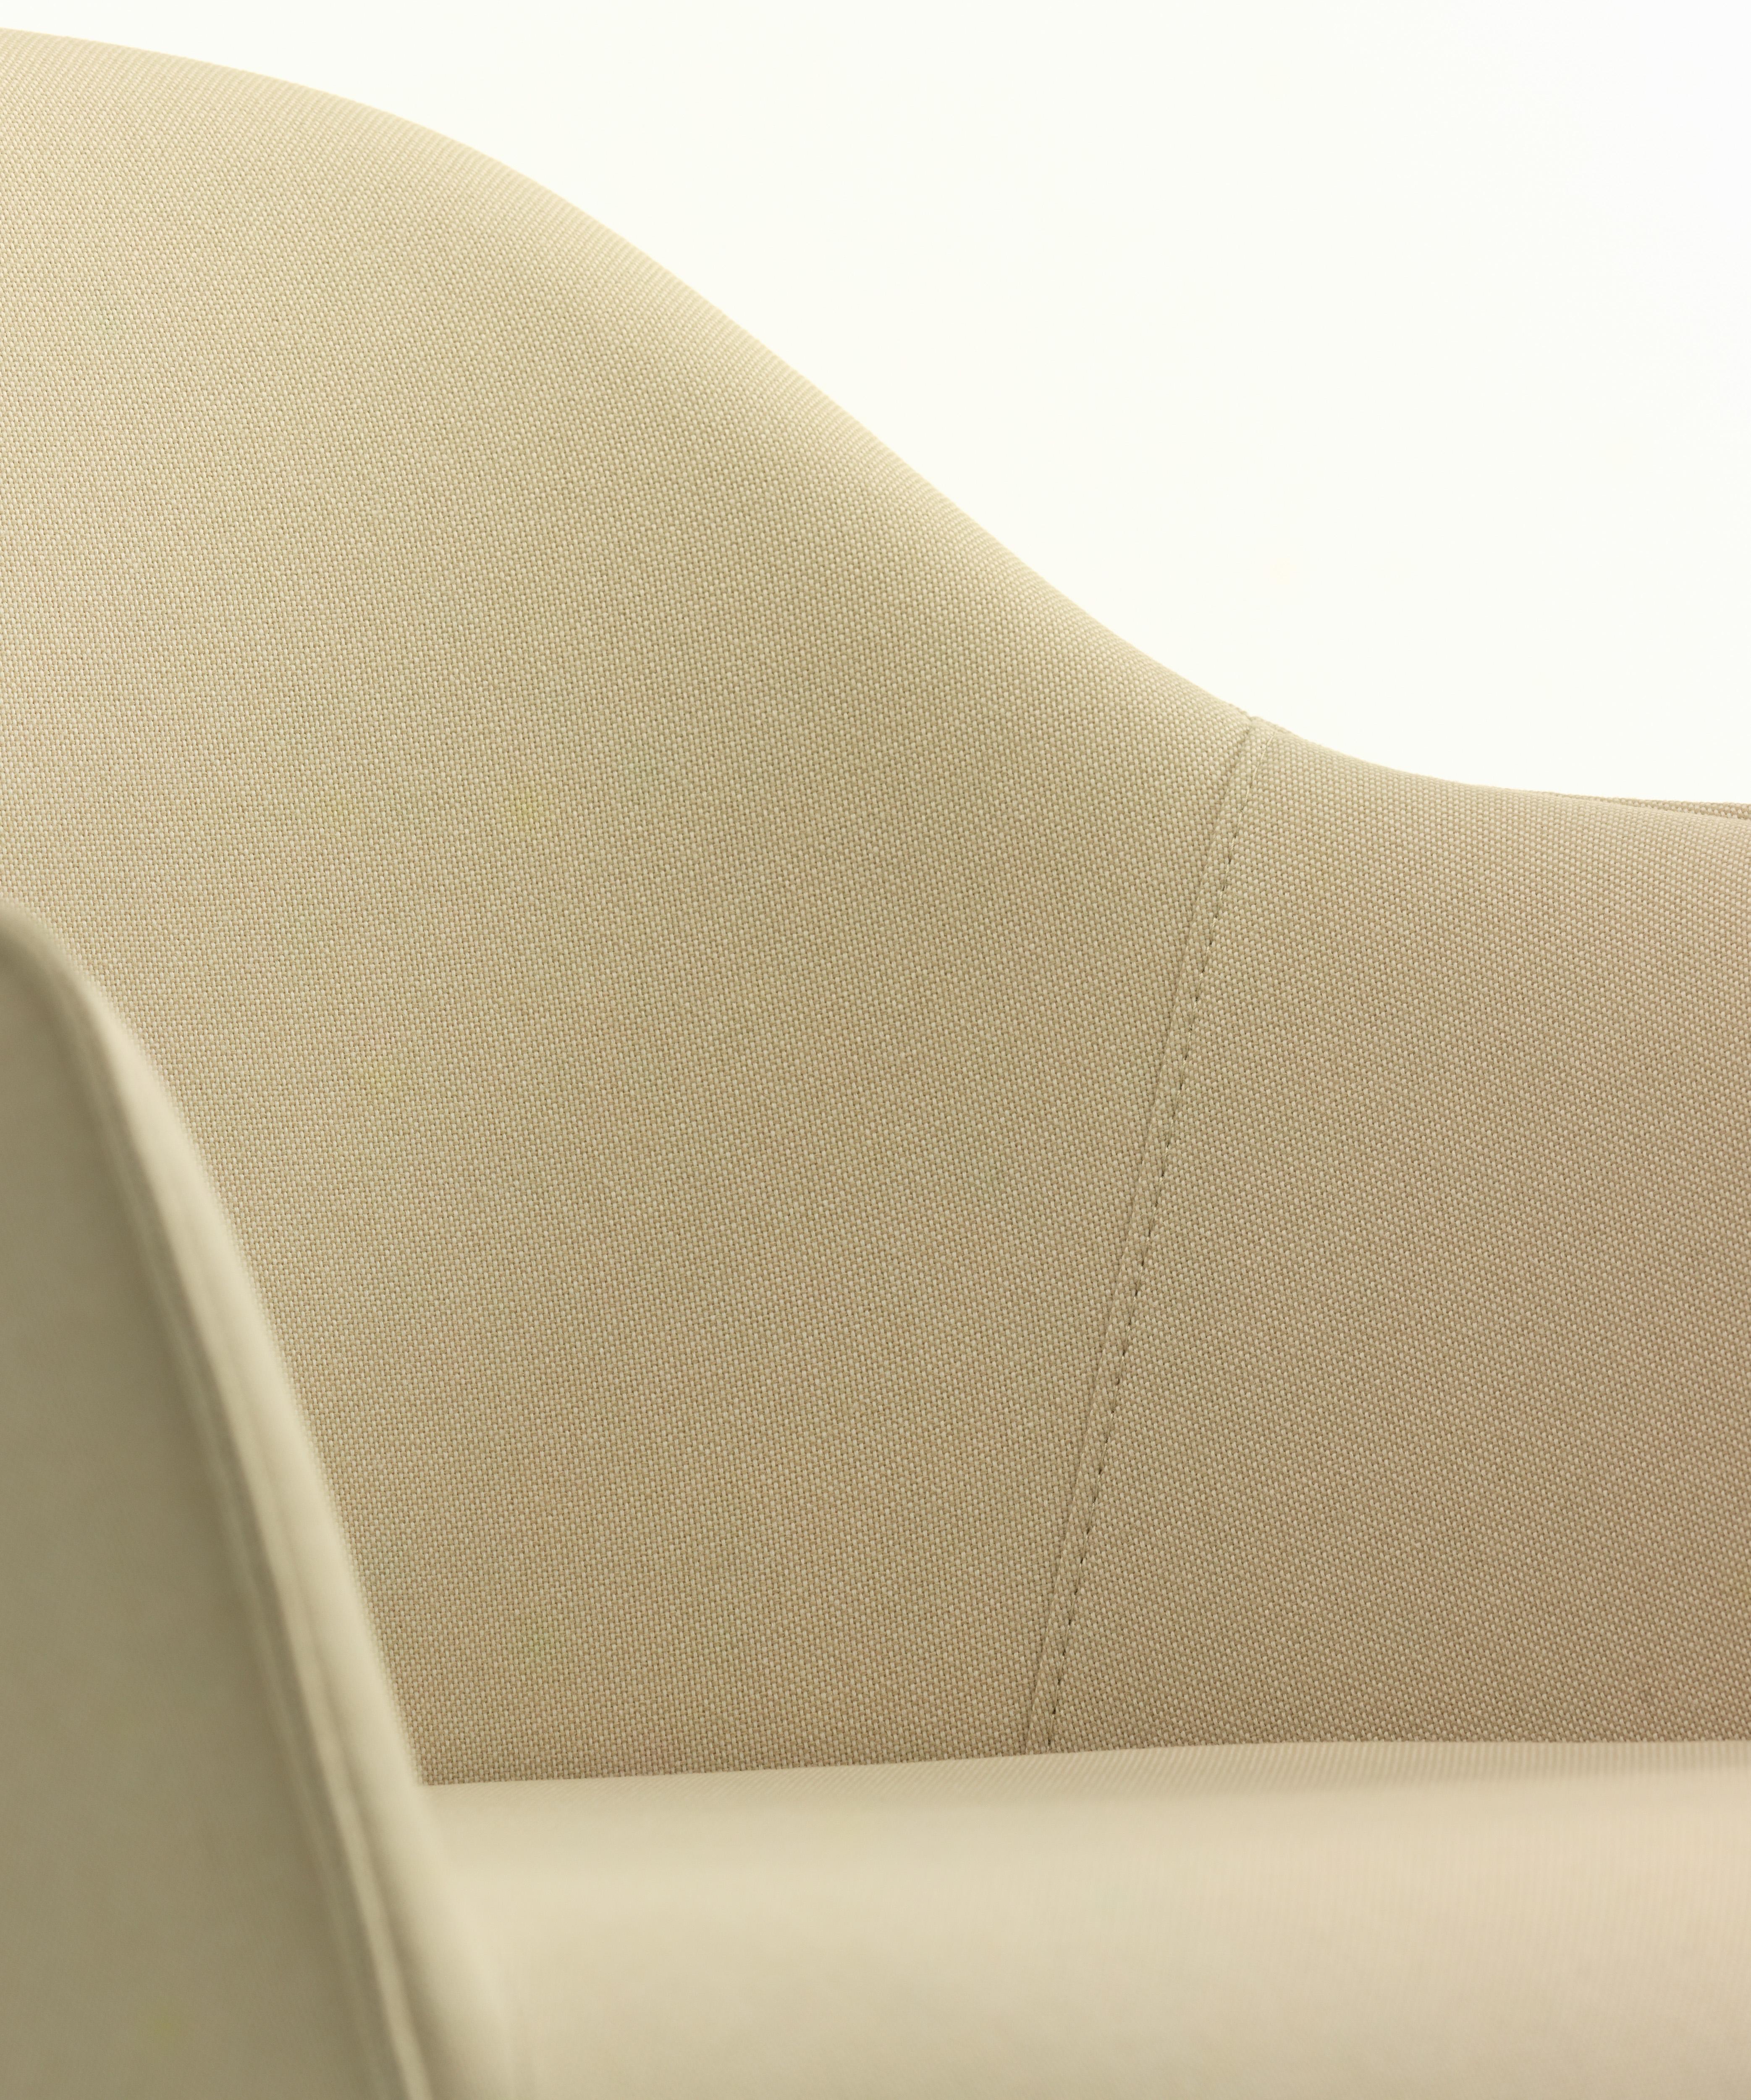 Swiss Vitra Softshell Chair in Ivory Laser by Ronan & Erwan Bouroullec For Sale